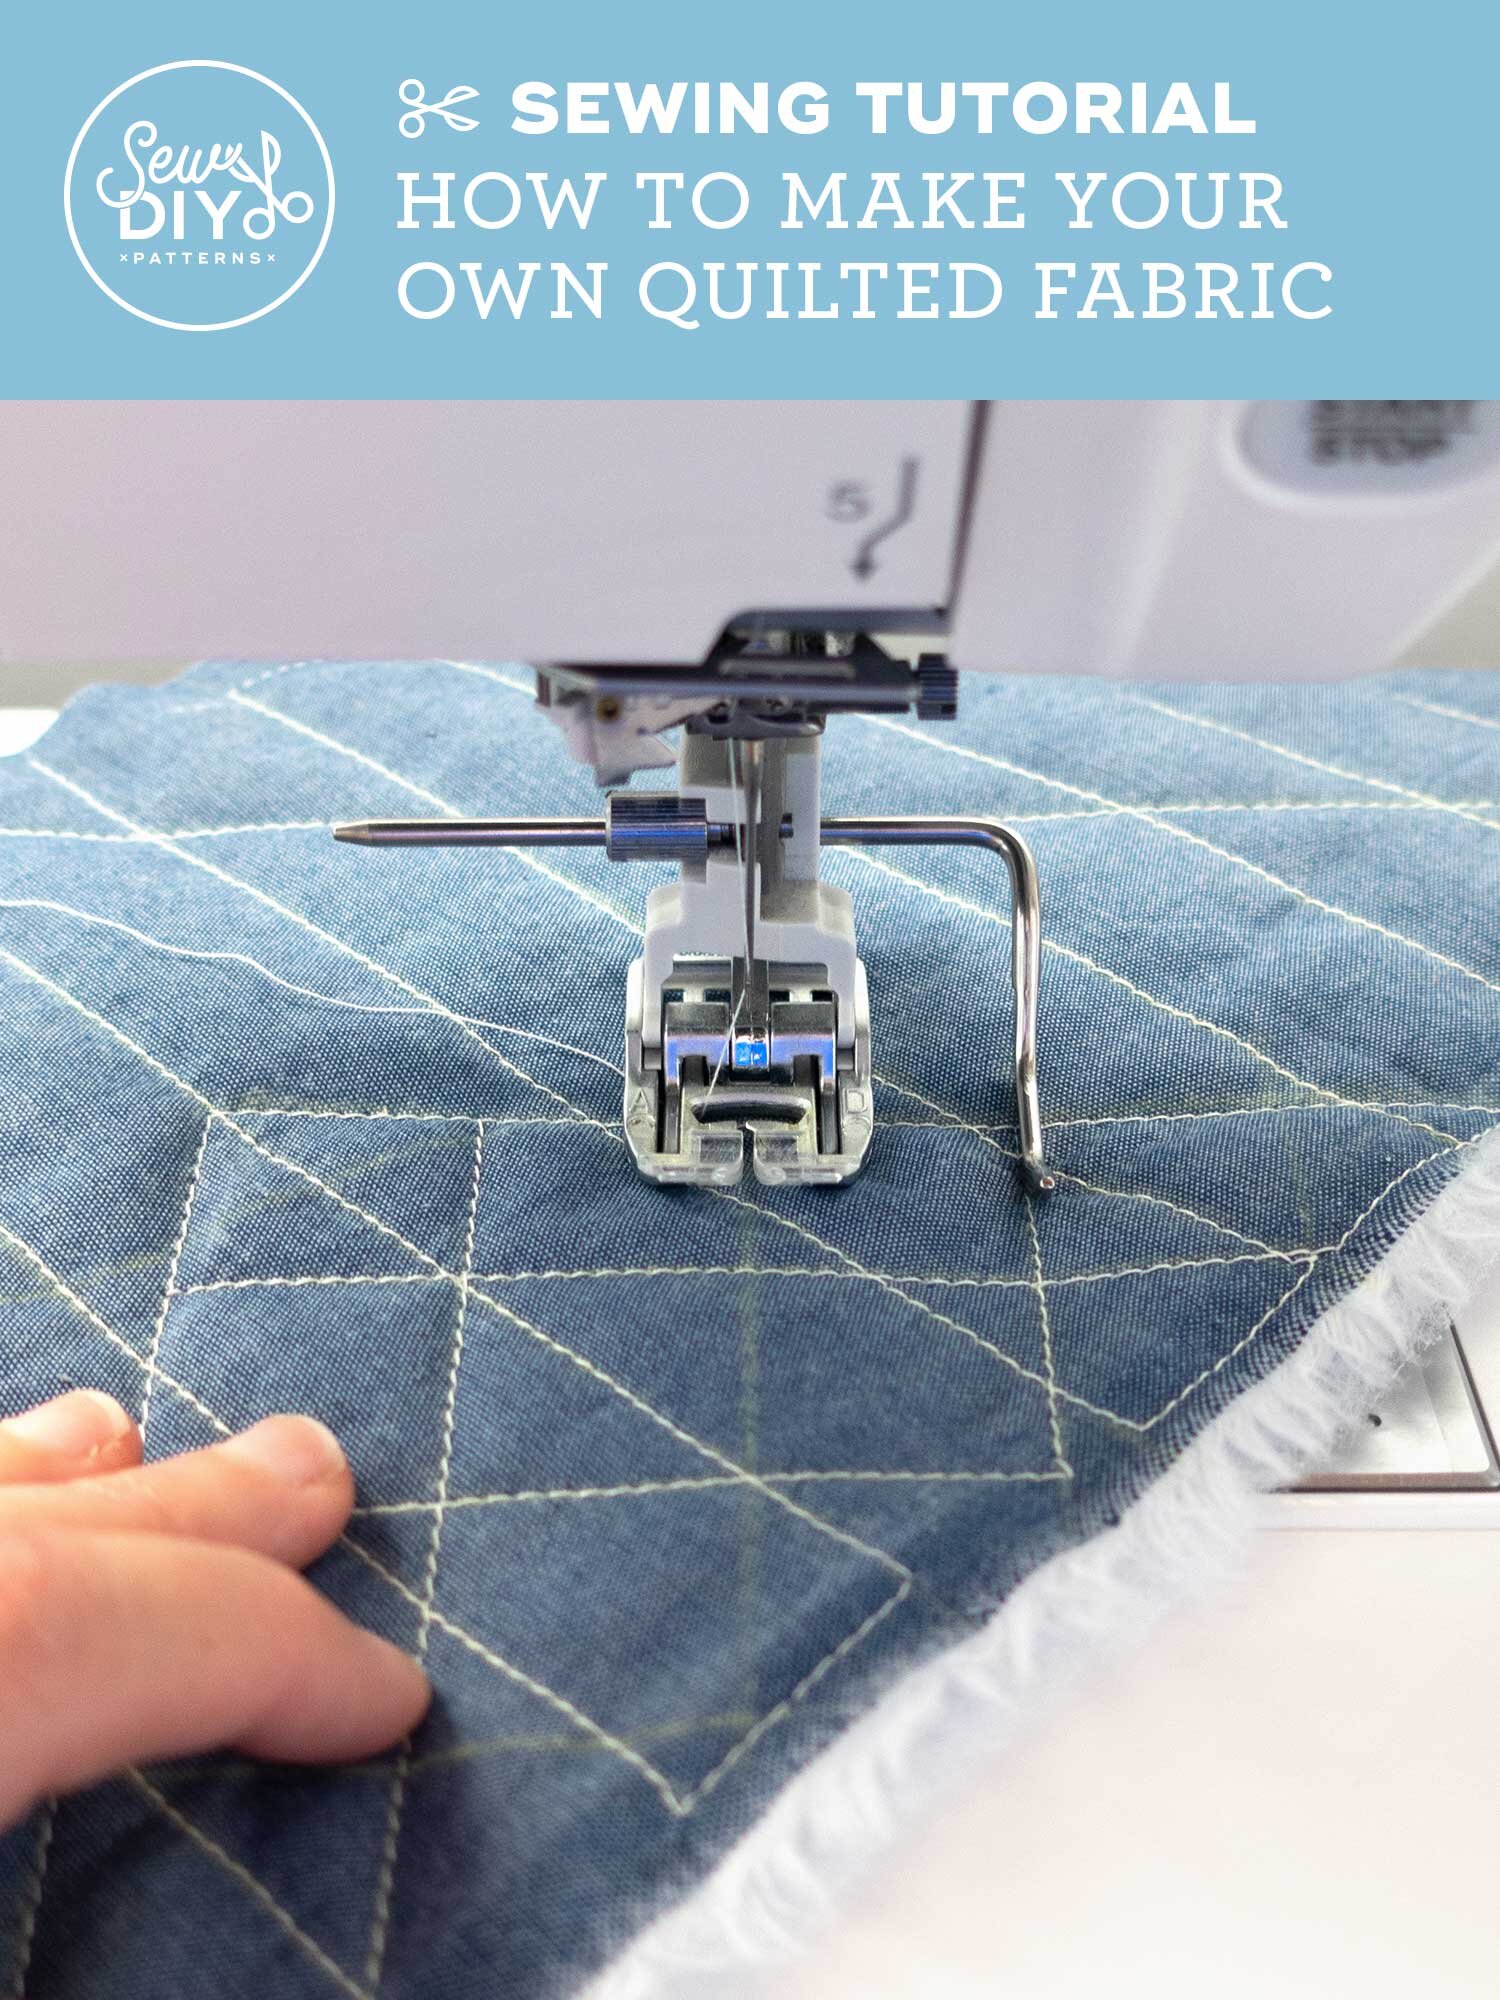 How to make your own quilted fabric for the Quilted Slippers — Sew DIY